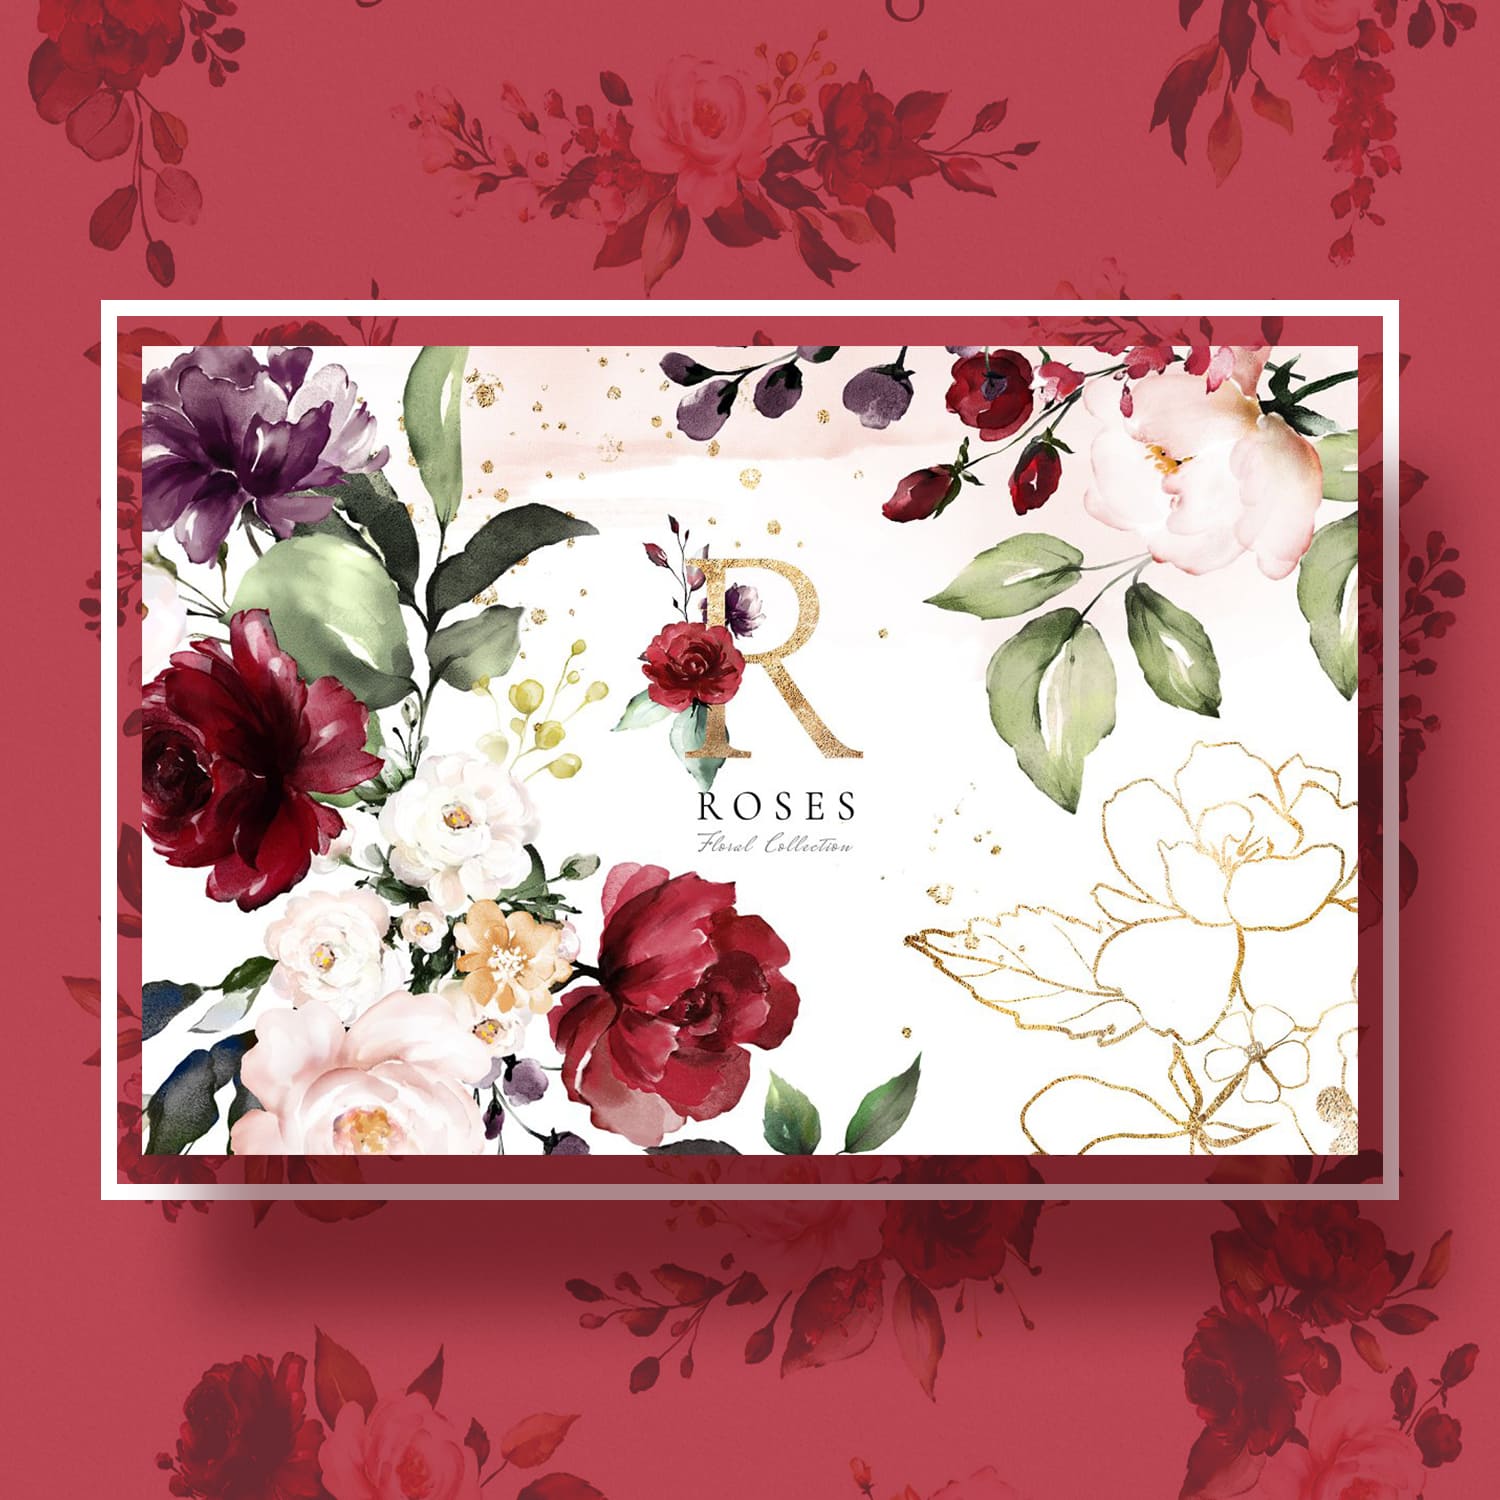 Roses. Watercolor Floral Collection main cover.